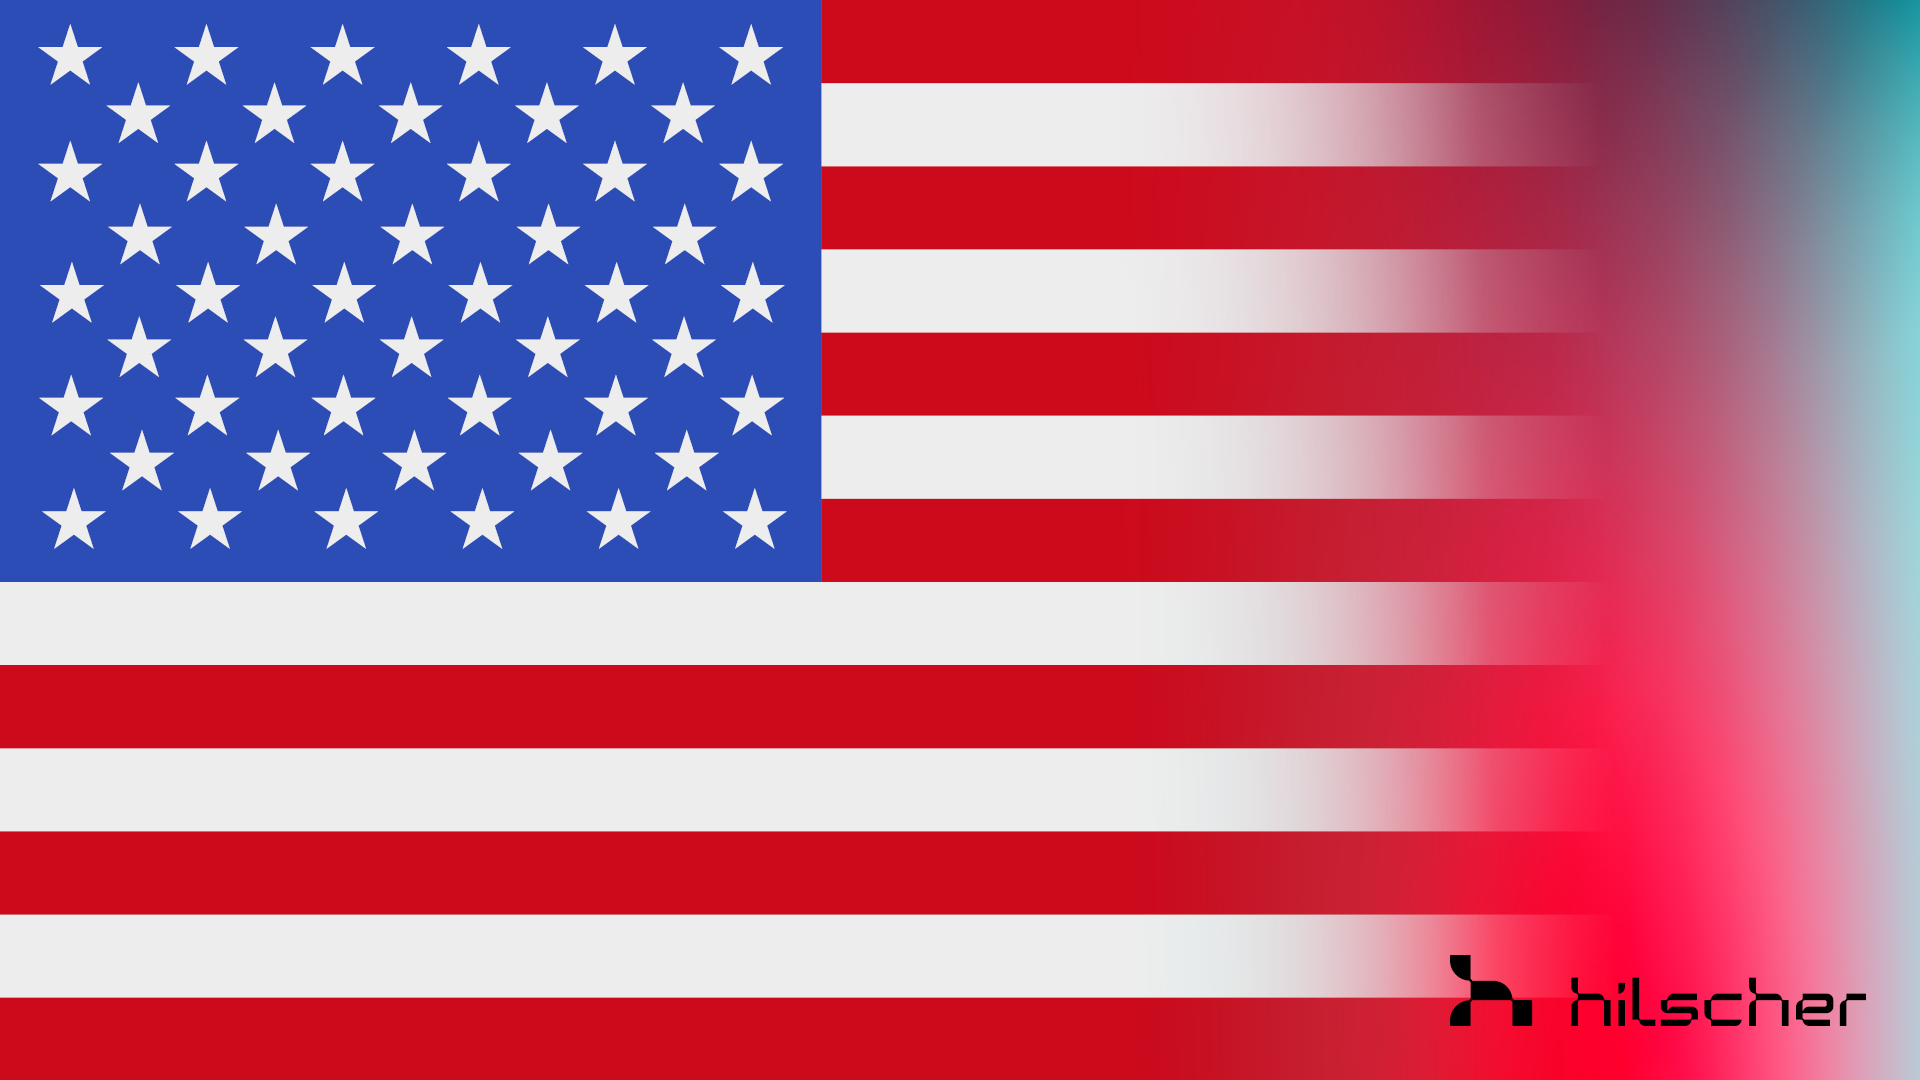 The flag of the United States of America. On the right side of the picture is a fade to a colorful space, accounting for nearly a quarter of the image.